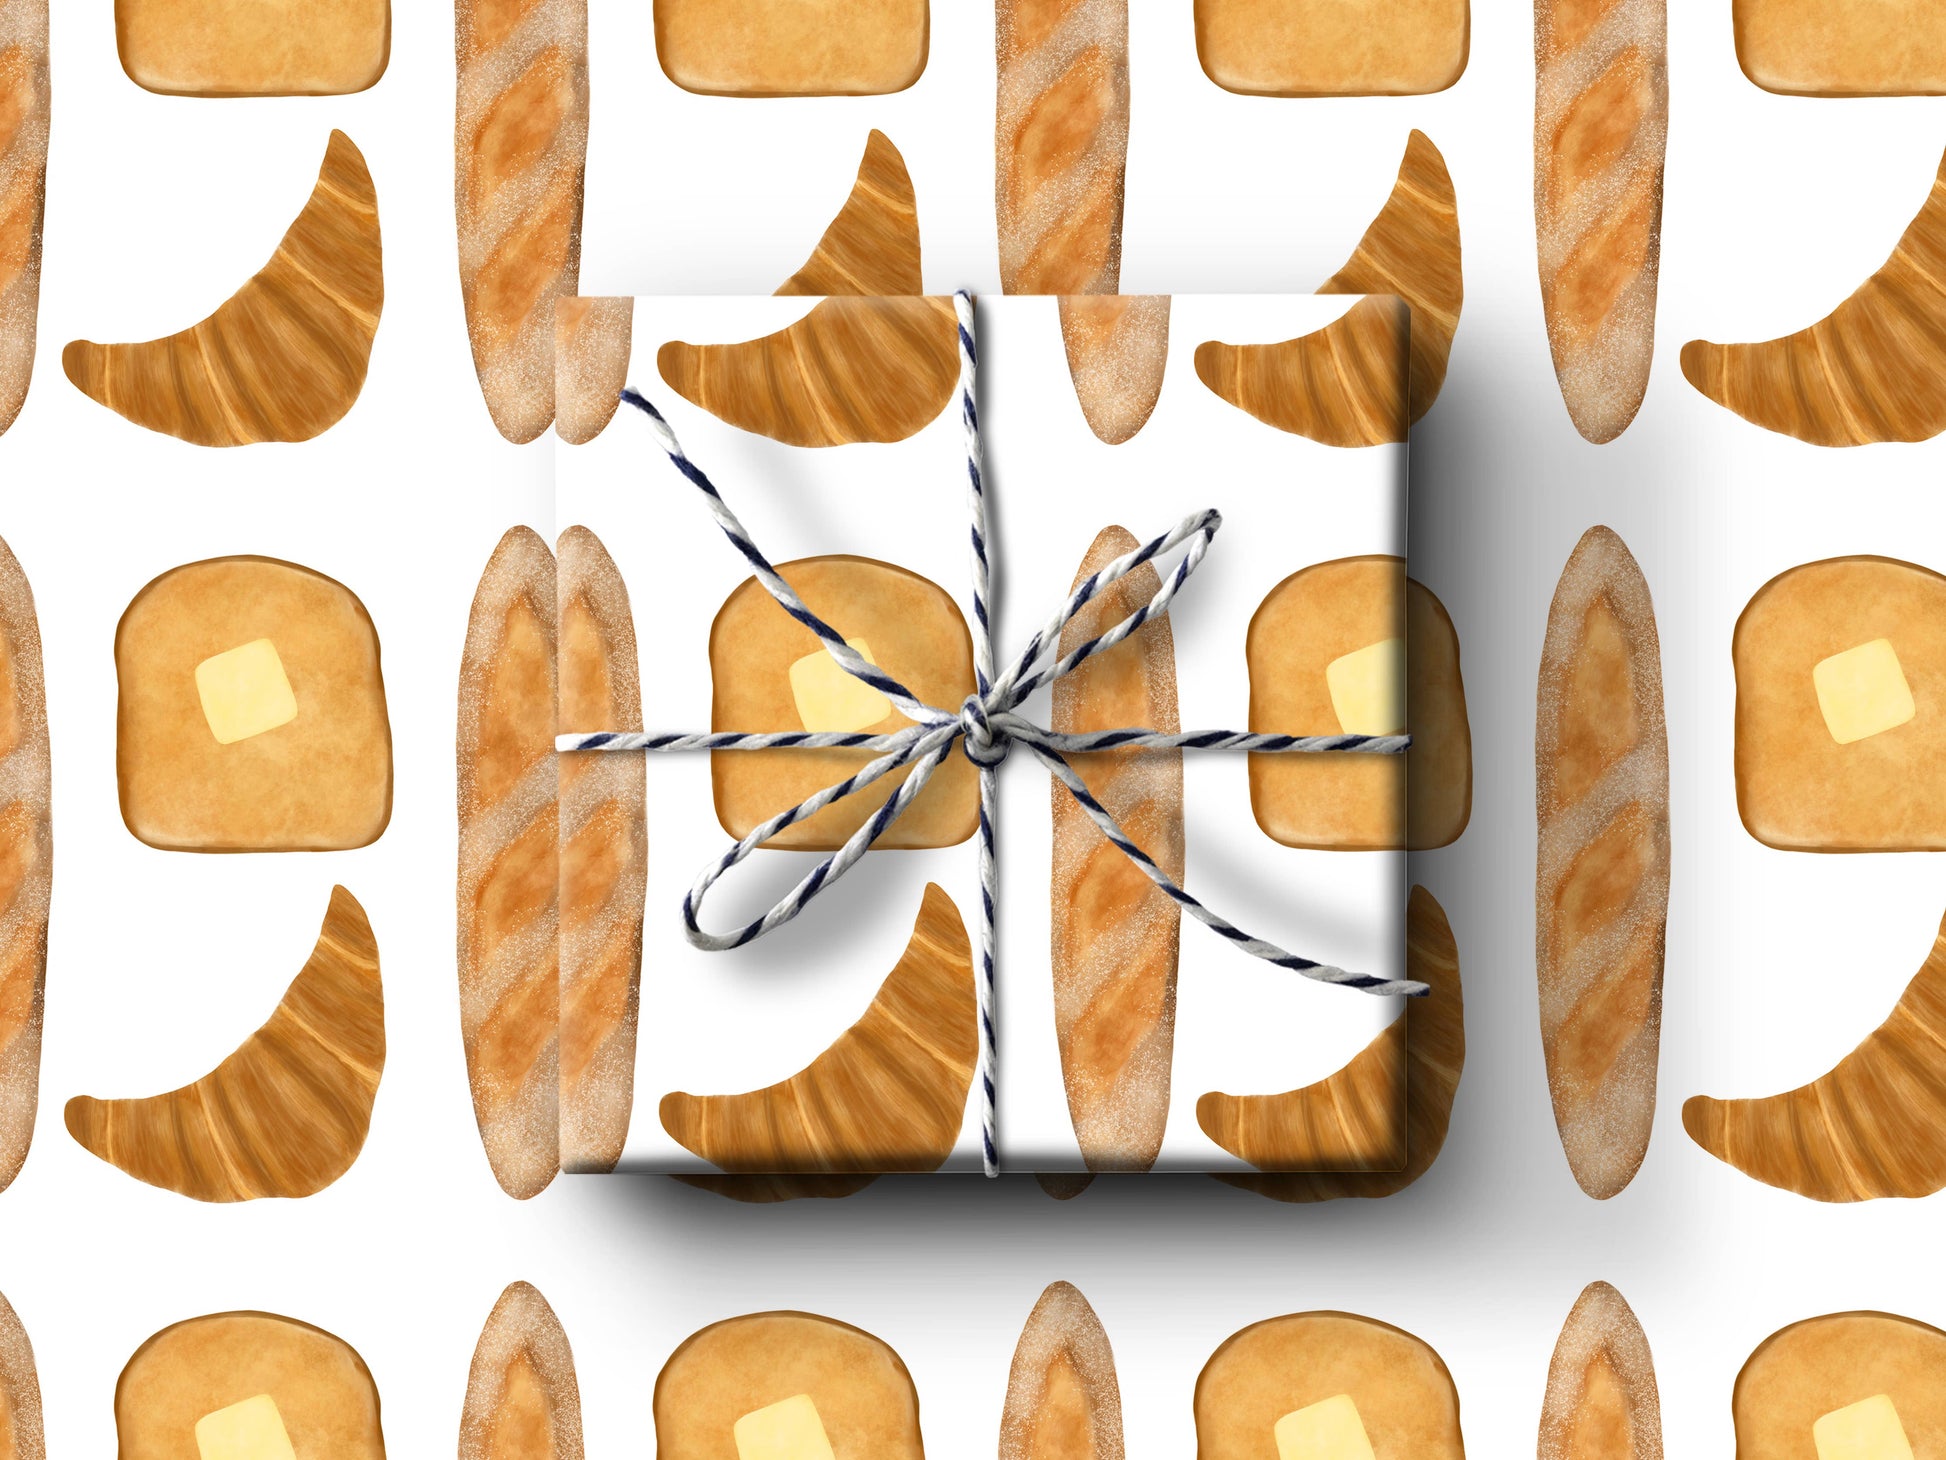 Bread gift wrap includes toast with butter, baguttes, and croissants.